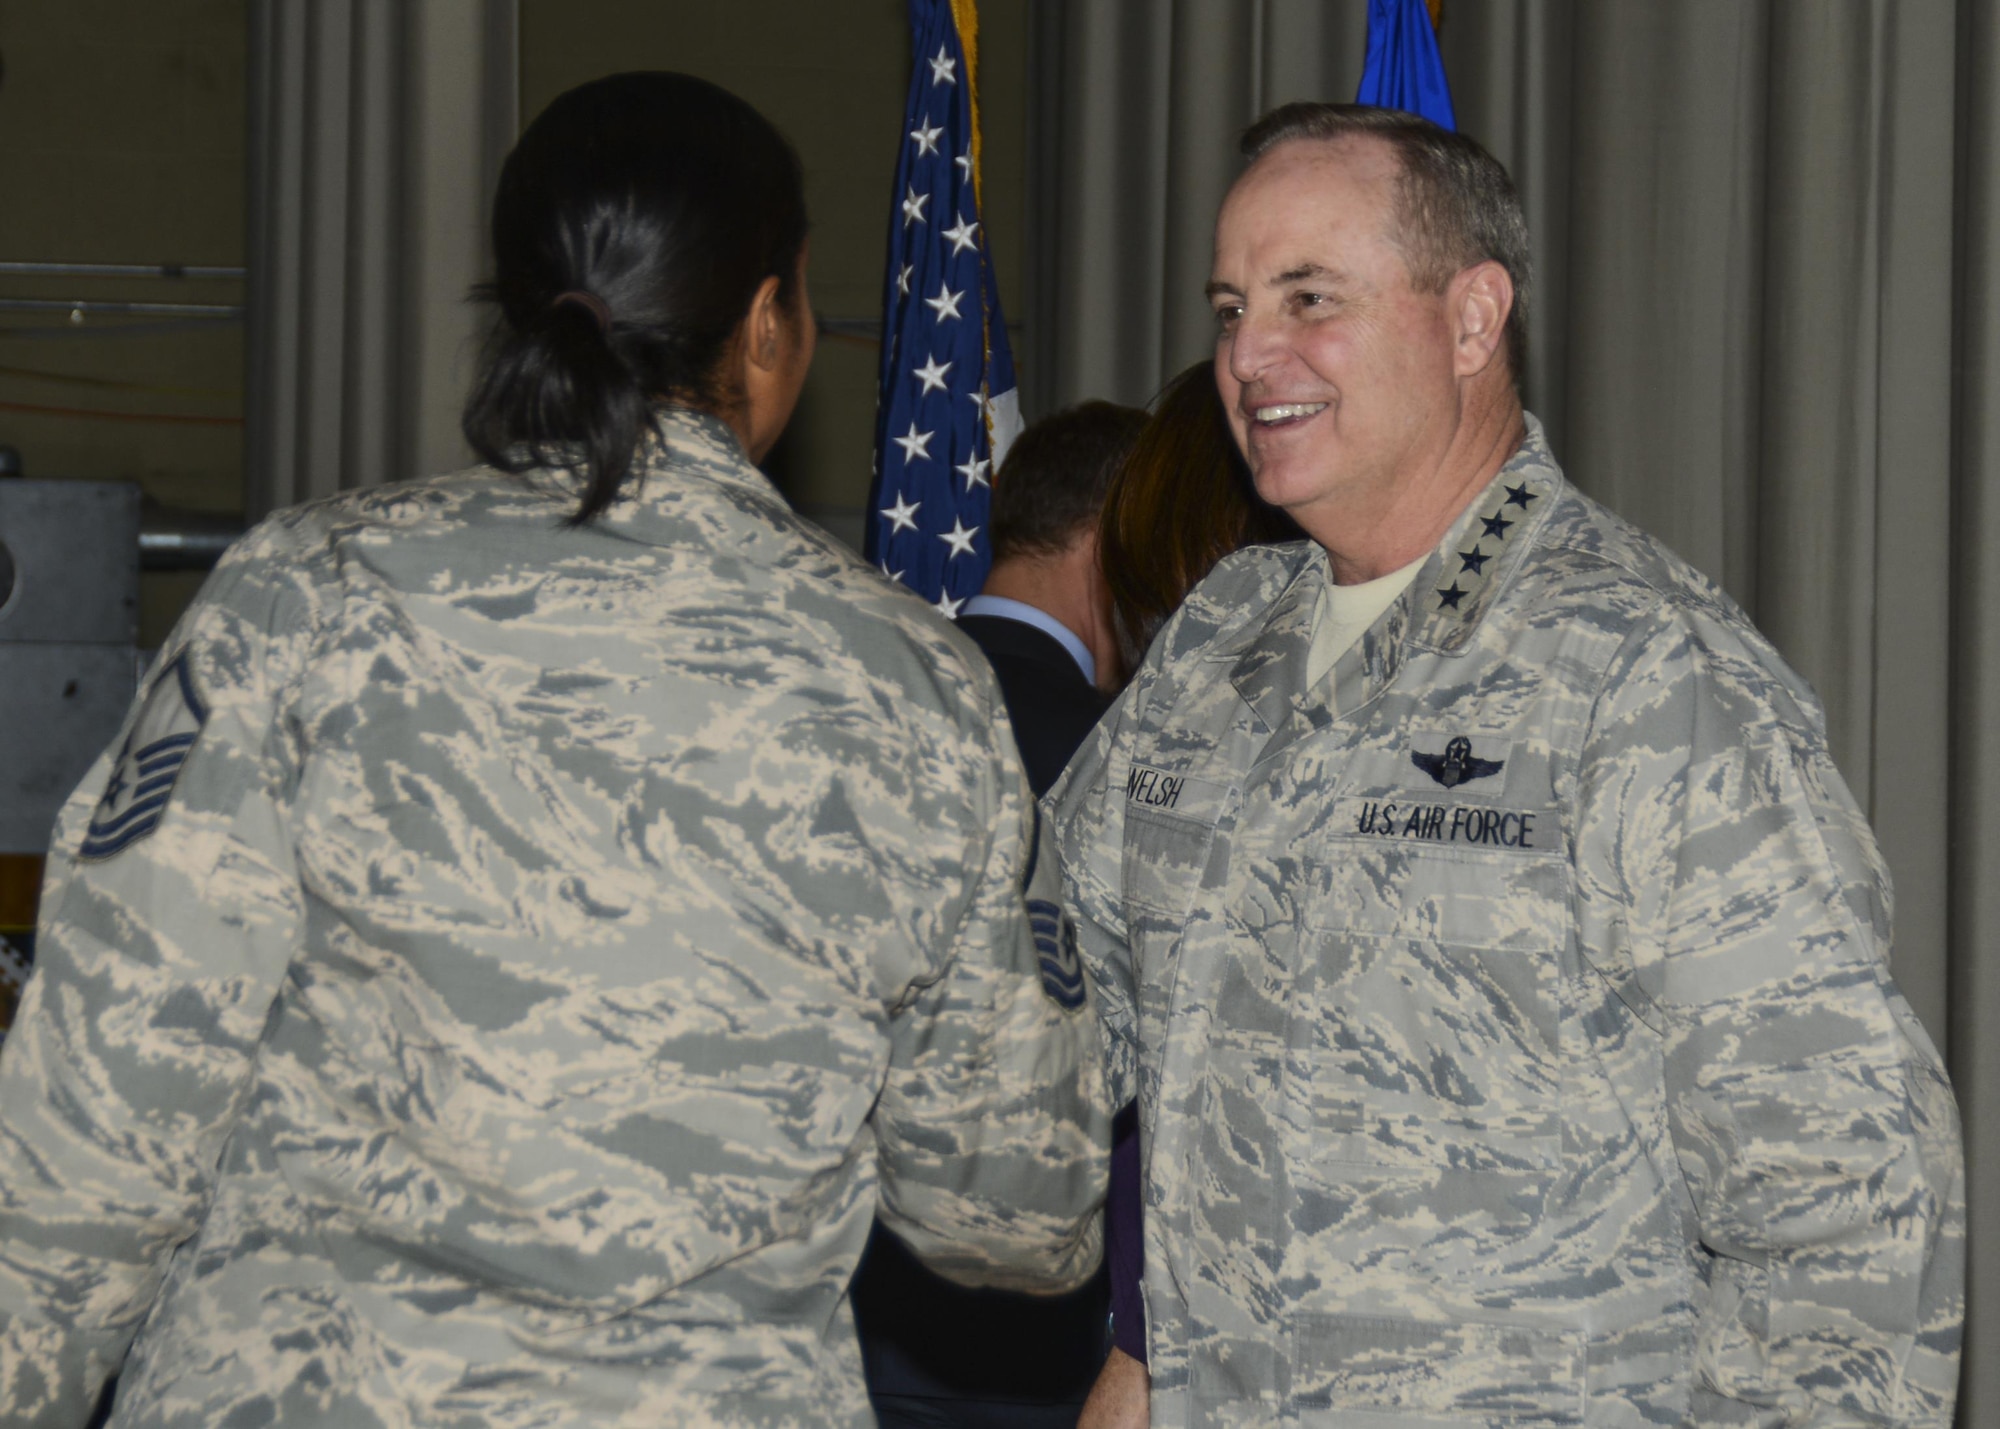 Chief of Staff Gen. Mark A. Welsh III shook hands with airmen at an all call Jan. 30, 2014, held inside the base theater at Edwards Air Force Base, Calif. Welsh visited Edwards AFB from Jan. 29 to Jan. 31 to meet with the Edwards AFB workforce and receive briefings on test programs. (U.S. Air Force photo/Rebecca Amber) 